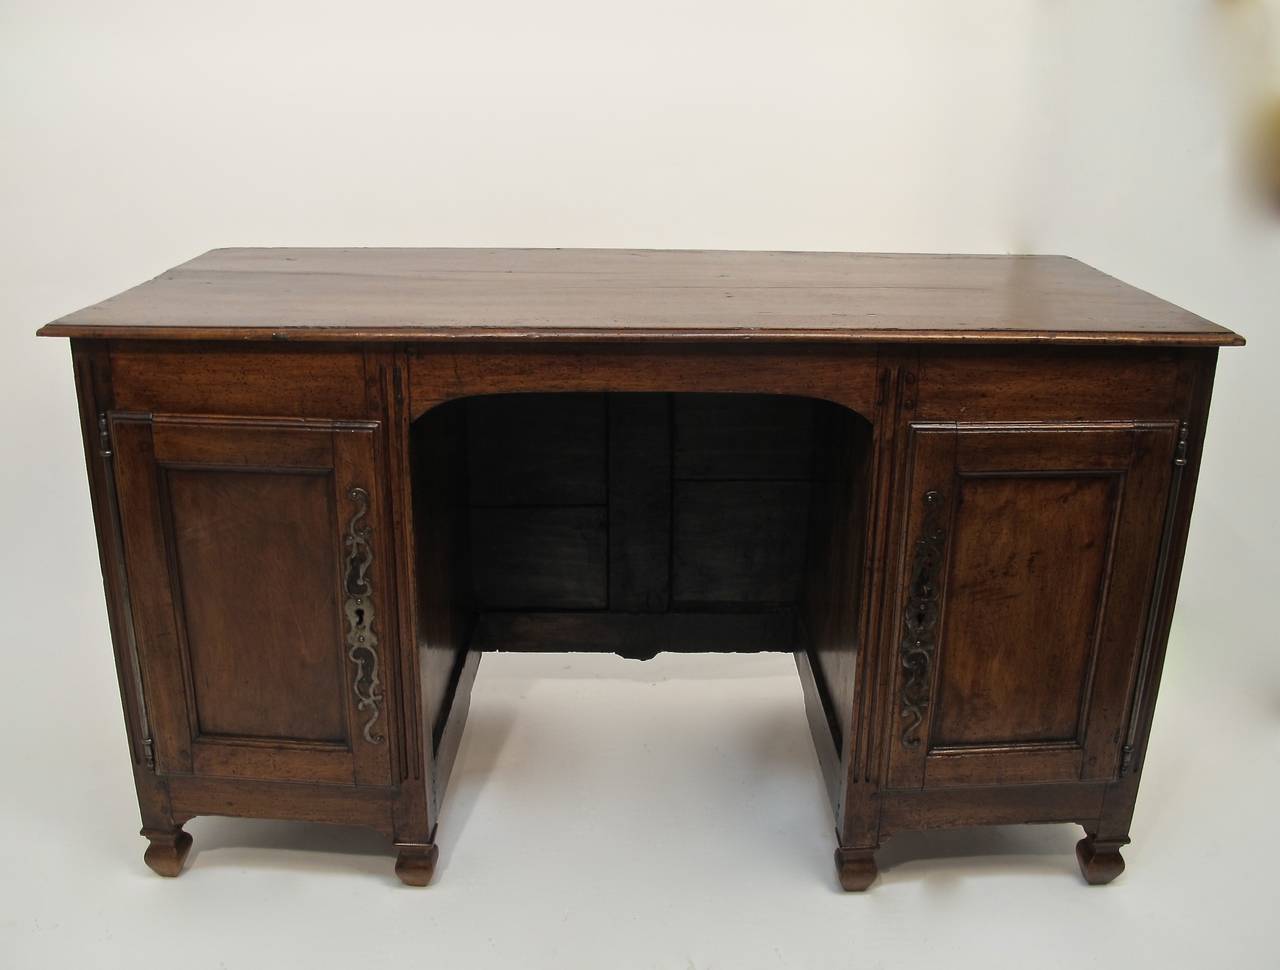 Beautiful deep patina to the walnut on this 18th century French desk. Side doors with original hardware open to two interior drawers on either side. Knee hole measures 26